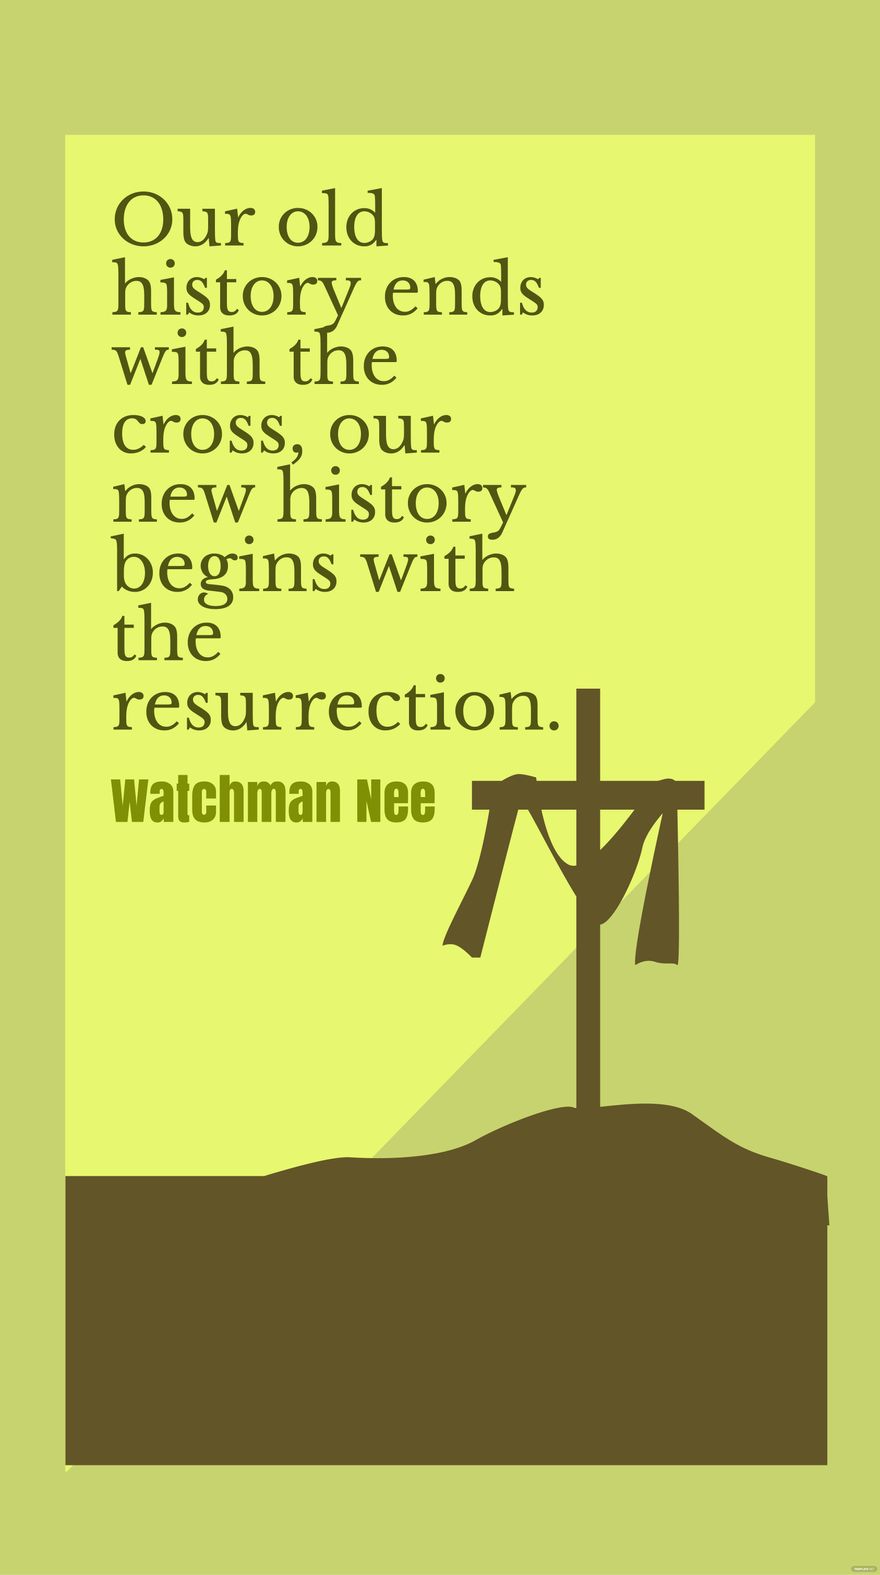 Free Watchman Nee - Our old history ends with the cross, our new history begins with the resurrection.